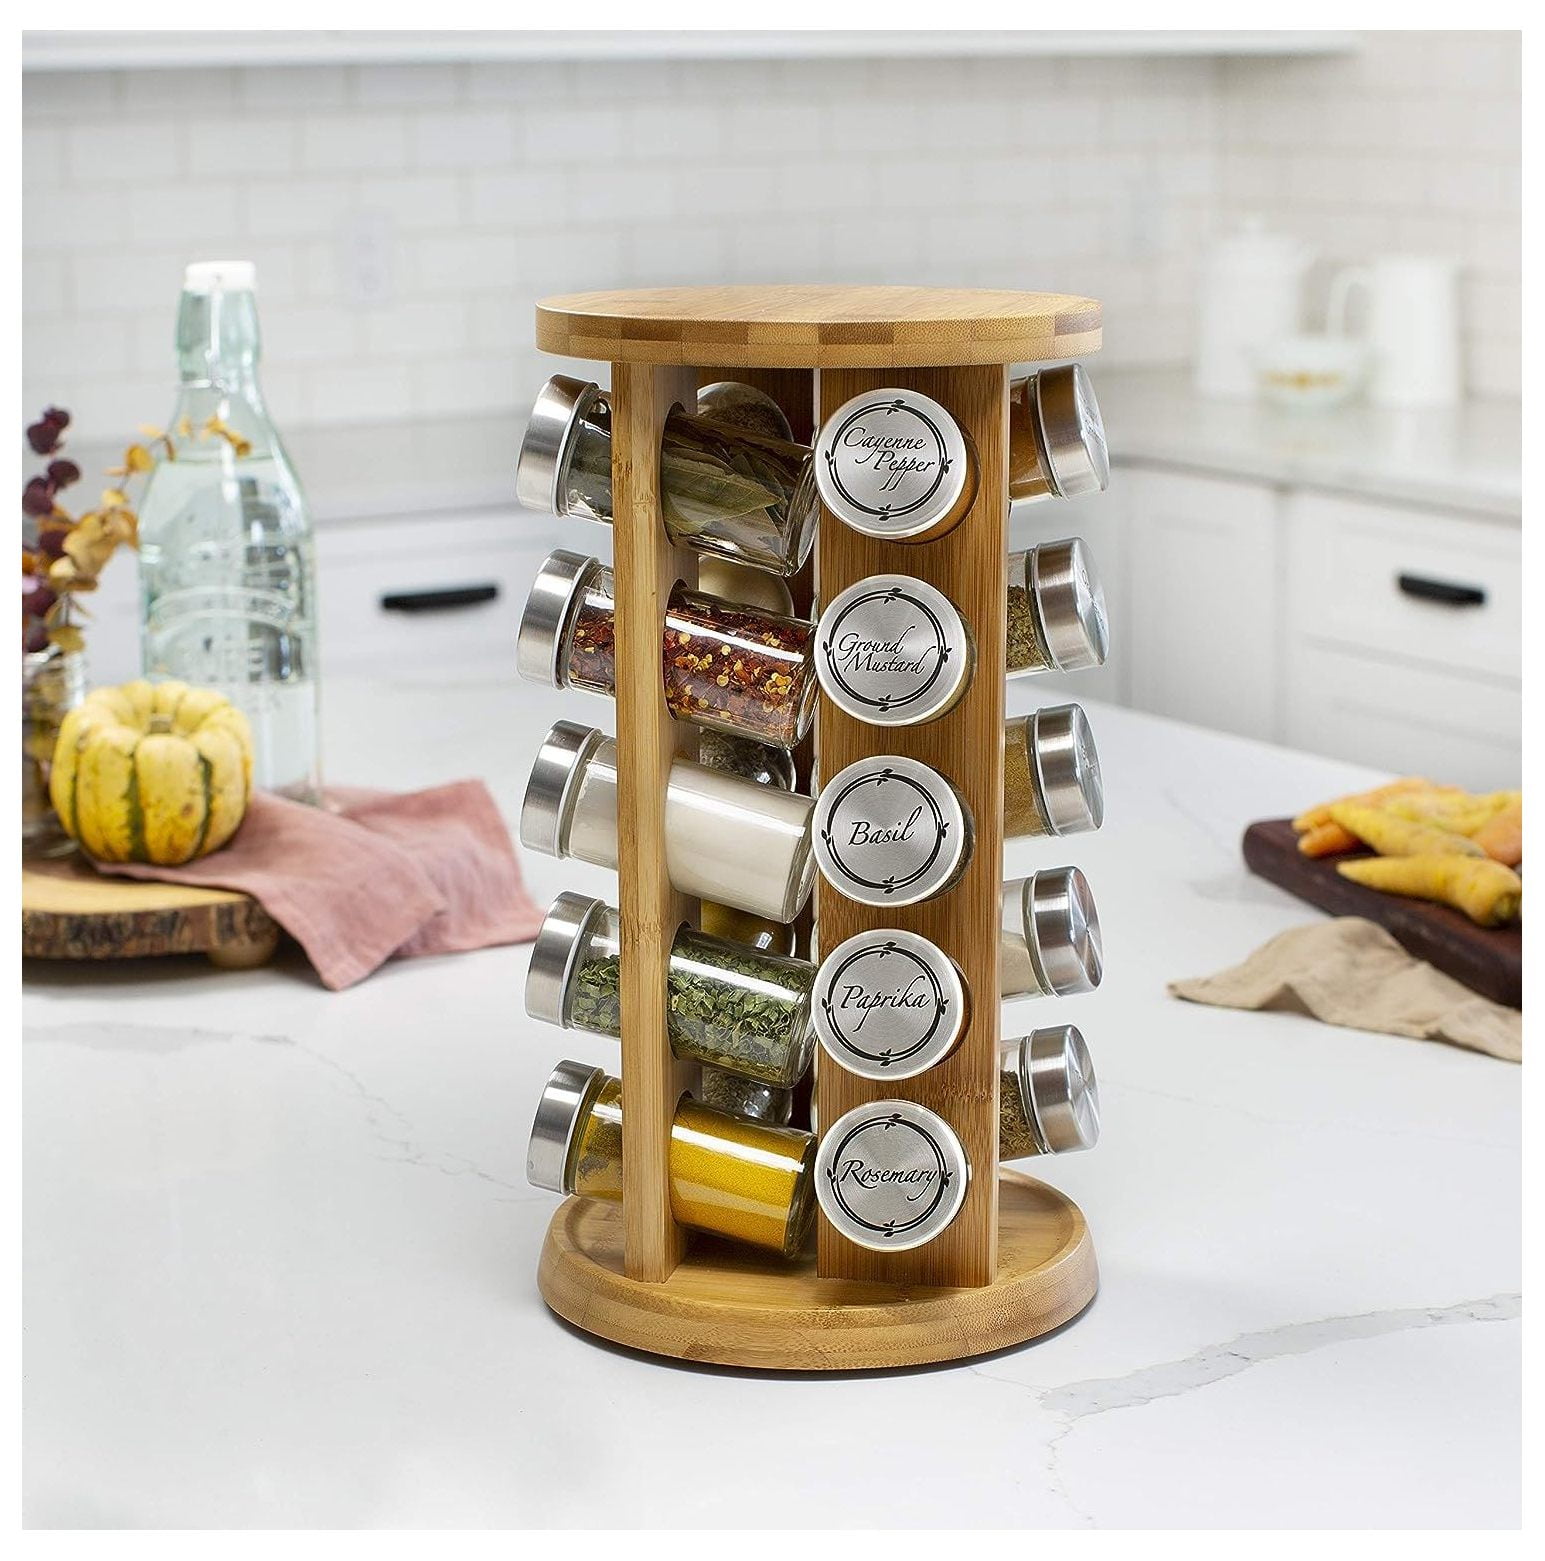 Pinnacle Cookery Bamboo Spice Rack For Countertop – Eco Friendly Space  Saving Wooden Seasoning Organizer 3-Tier Shelf